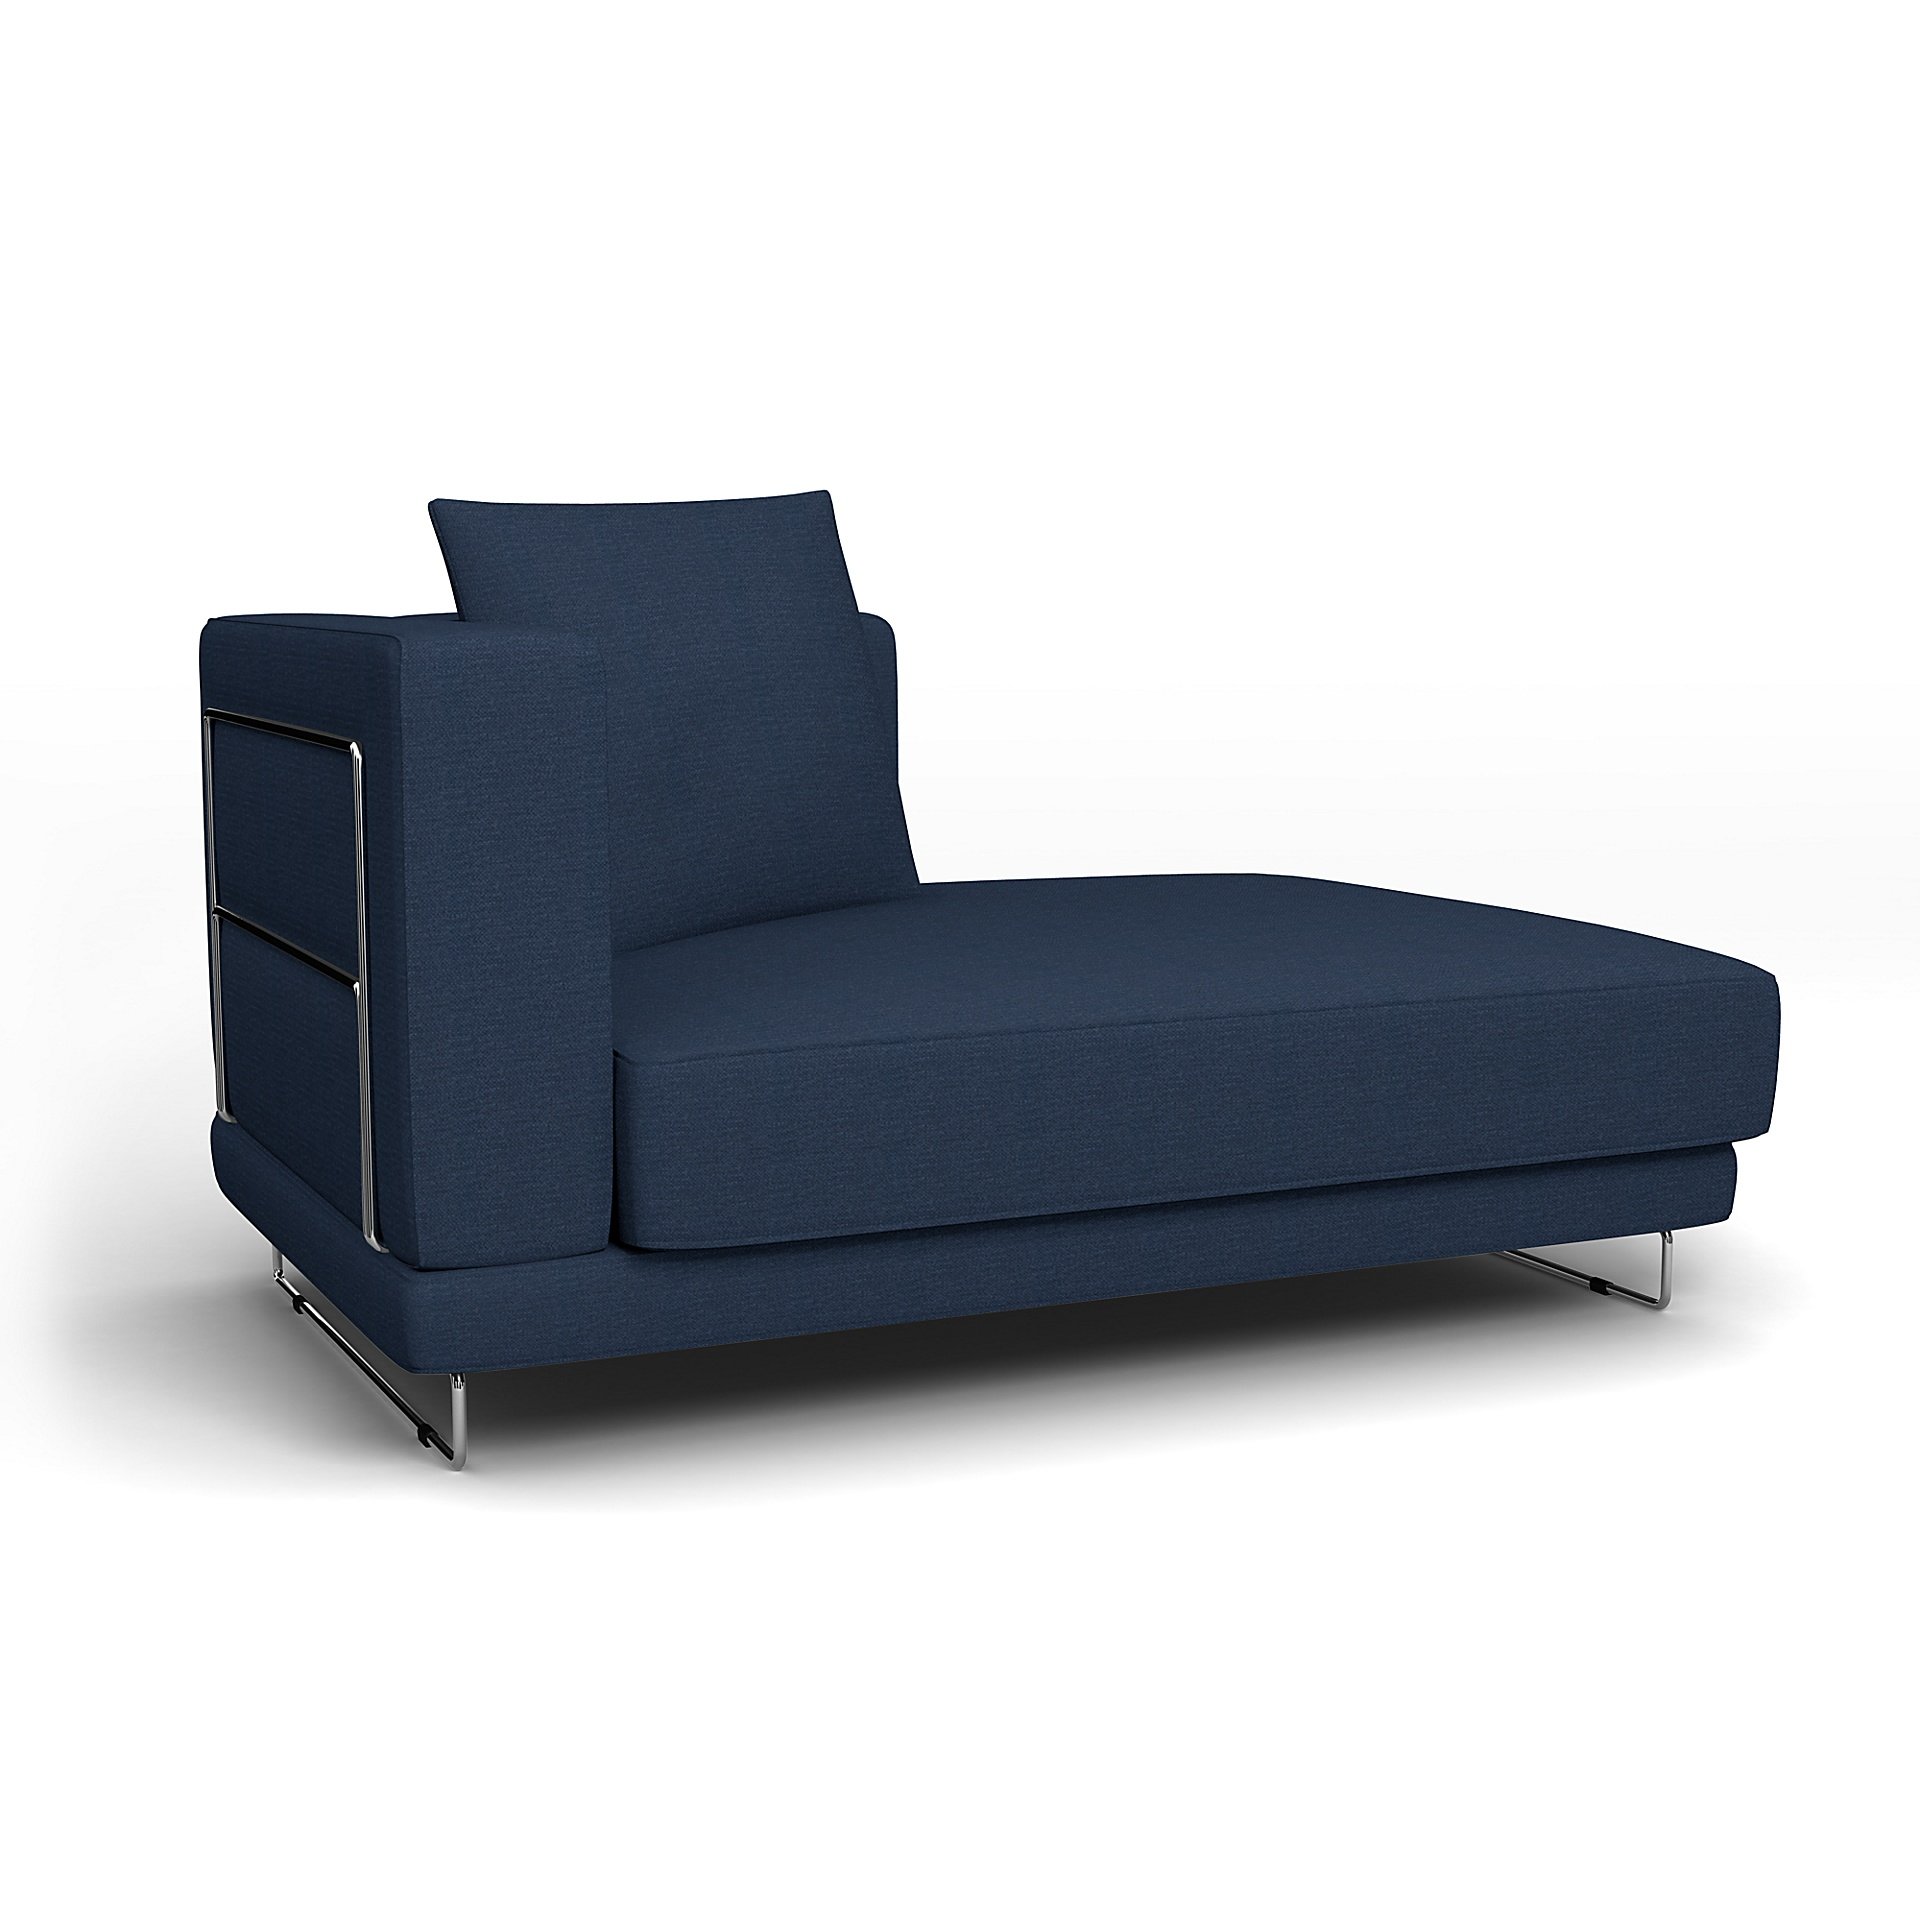 IKEA - Tylosand Chaise with Right Armrest Cover, Navy Blue, Linen - Bemz